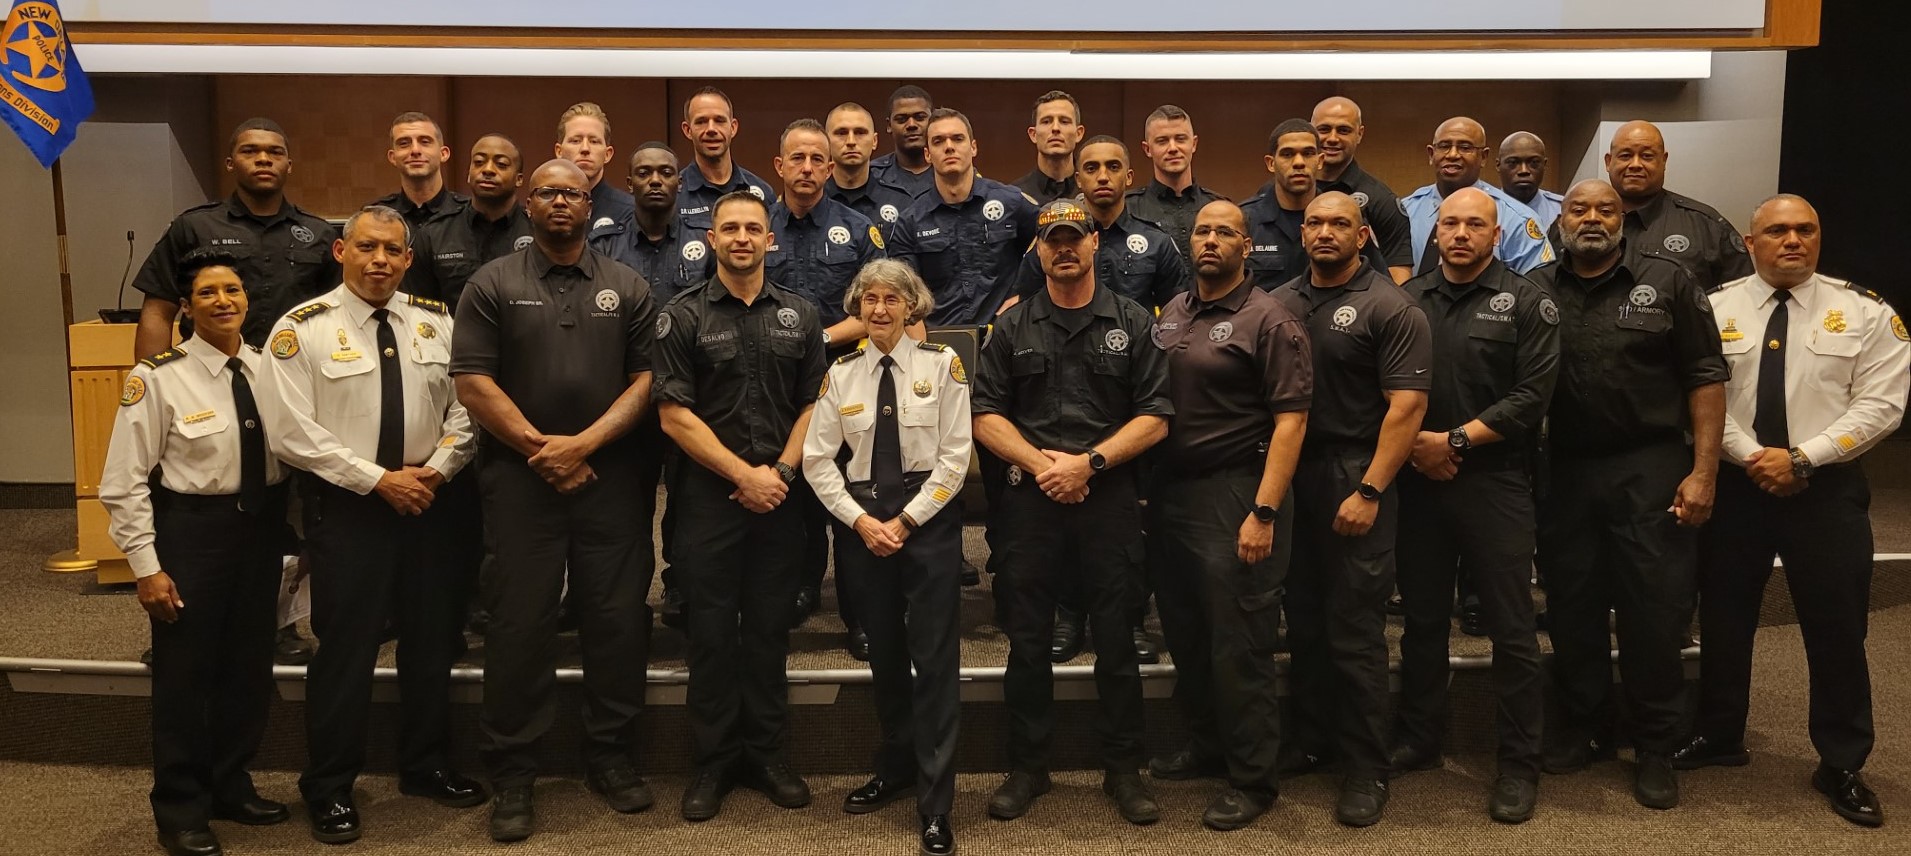 NOPD Graduates 15 Officers from SWAT Training